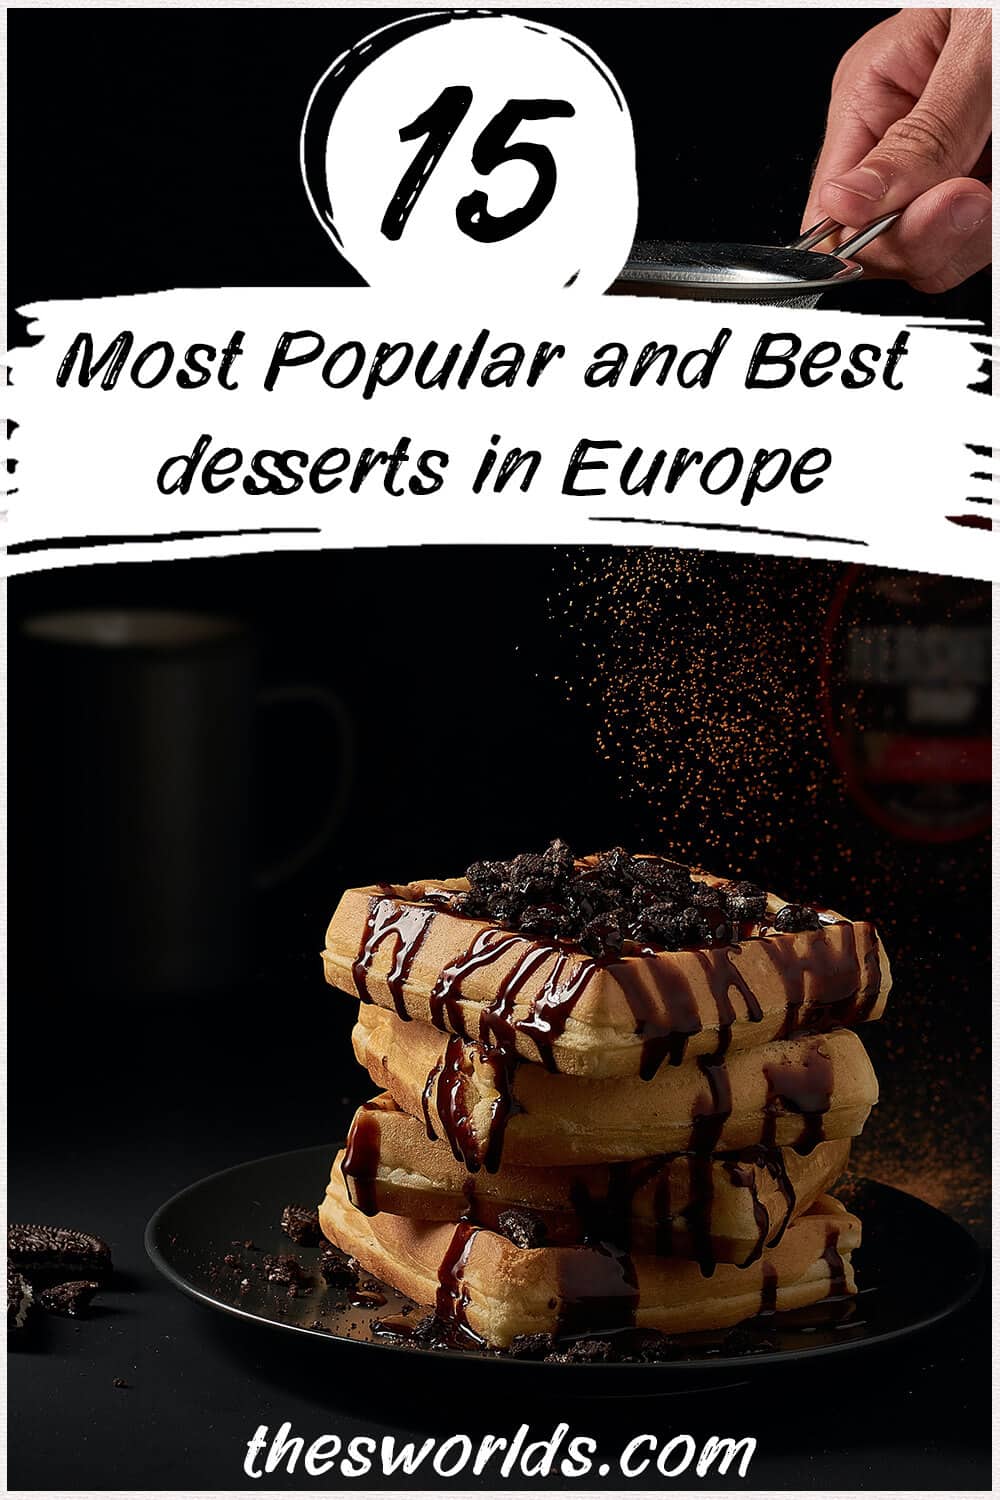 15 Most popular and best desserts in Europe